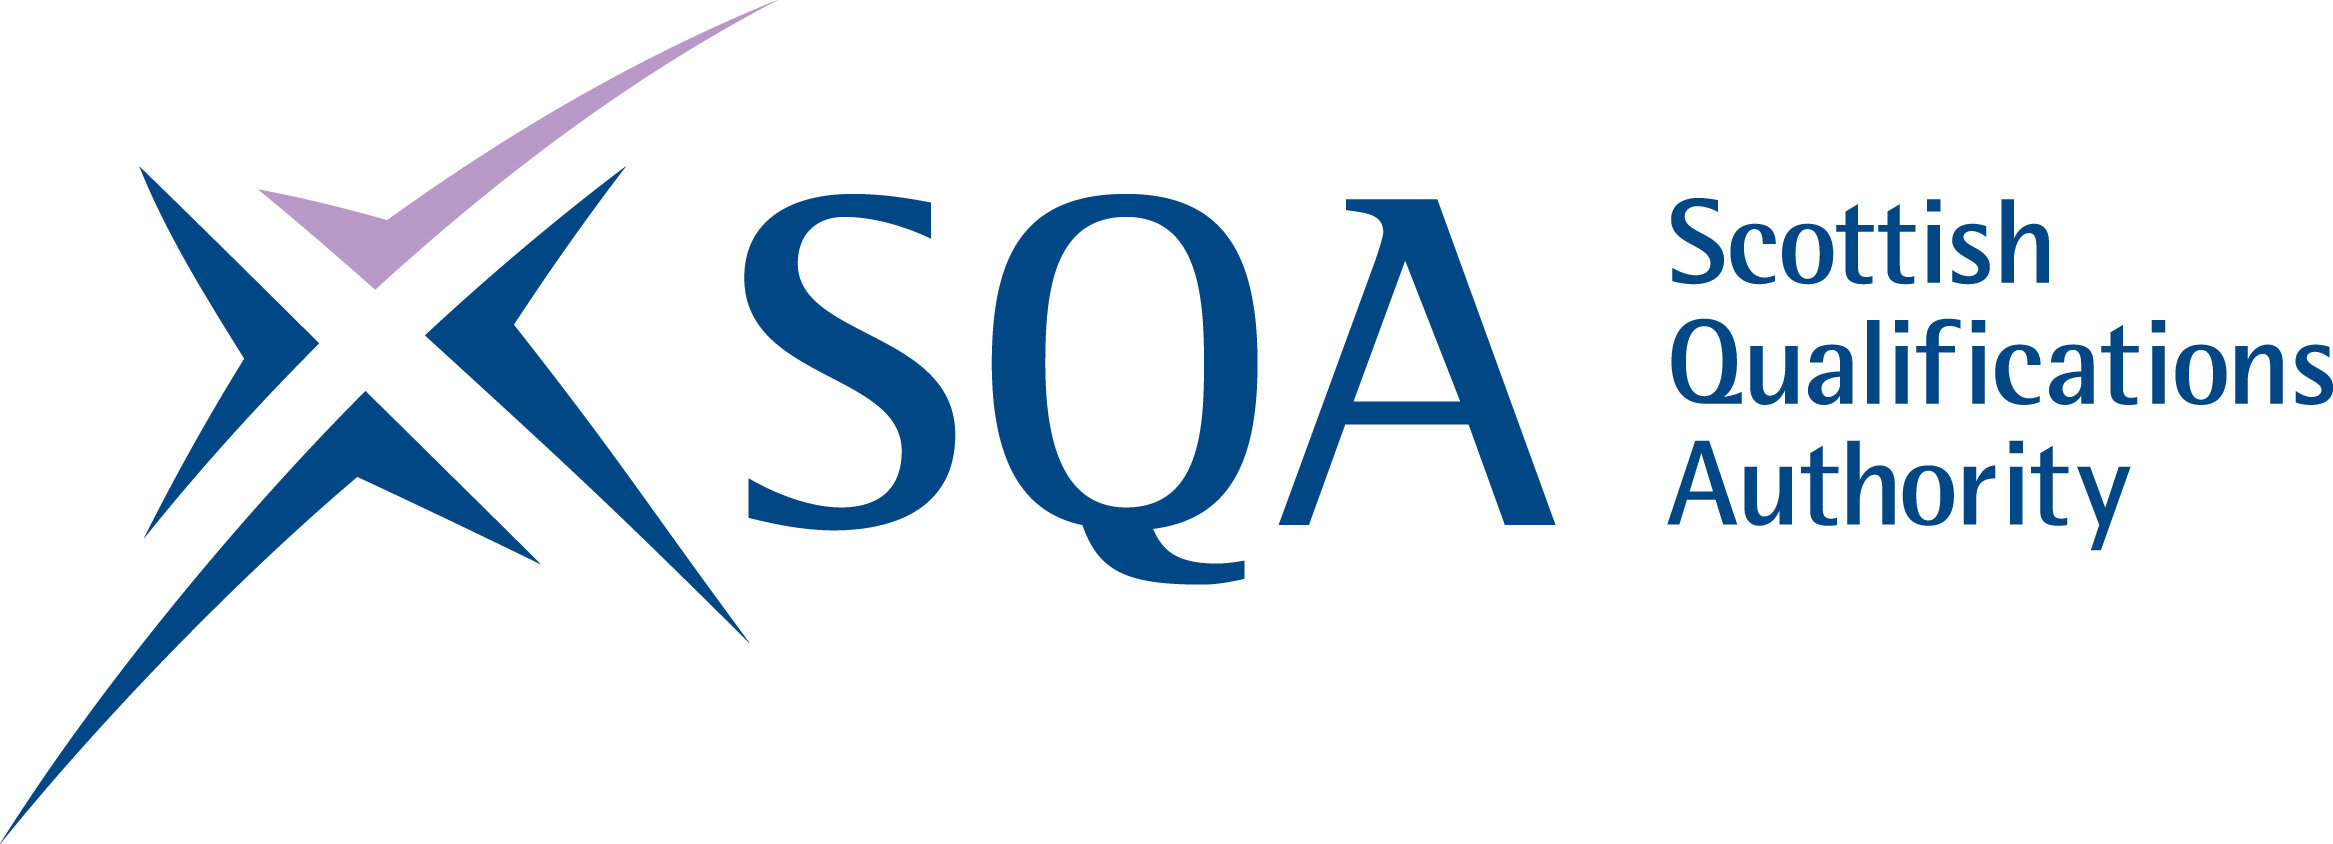 Health, Safety and Environmental Officer (Scottish Qualifications Authority)